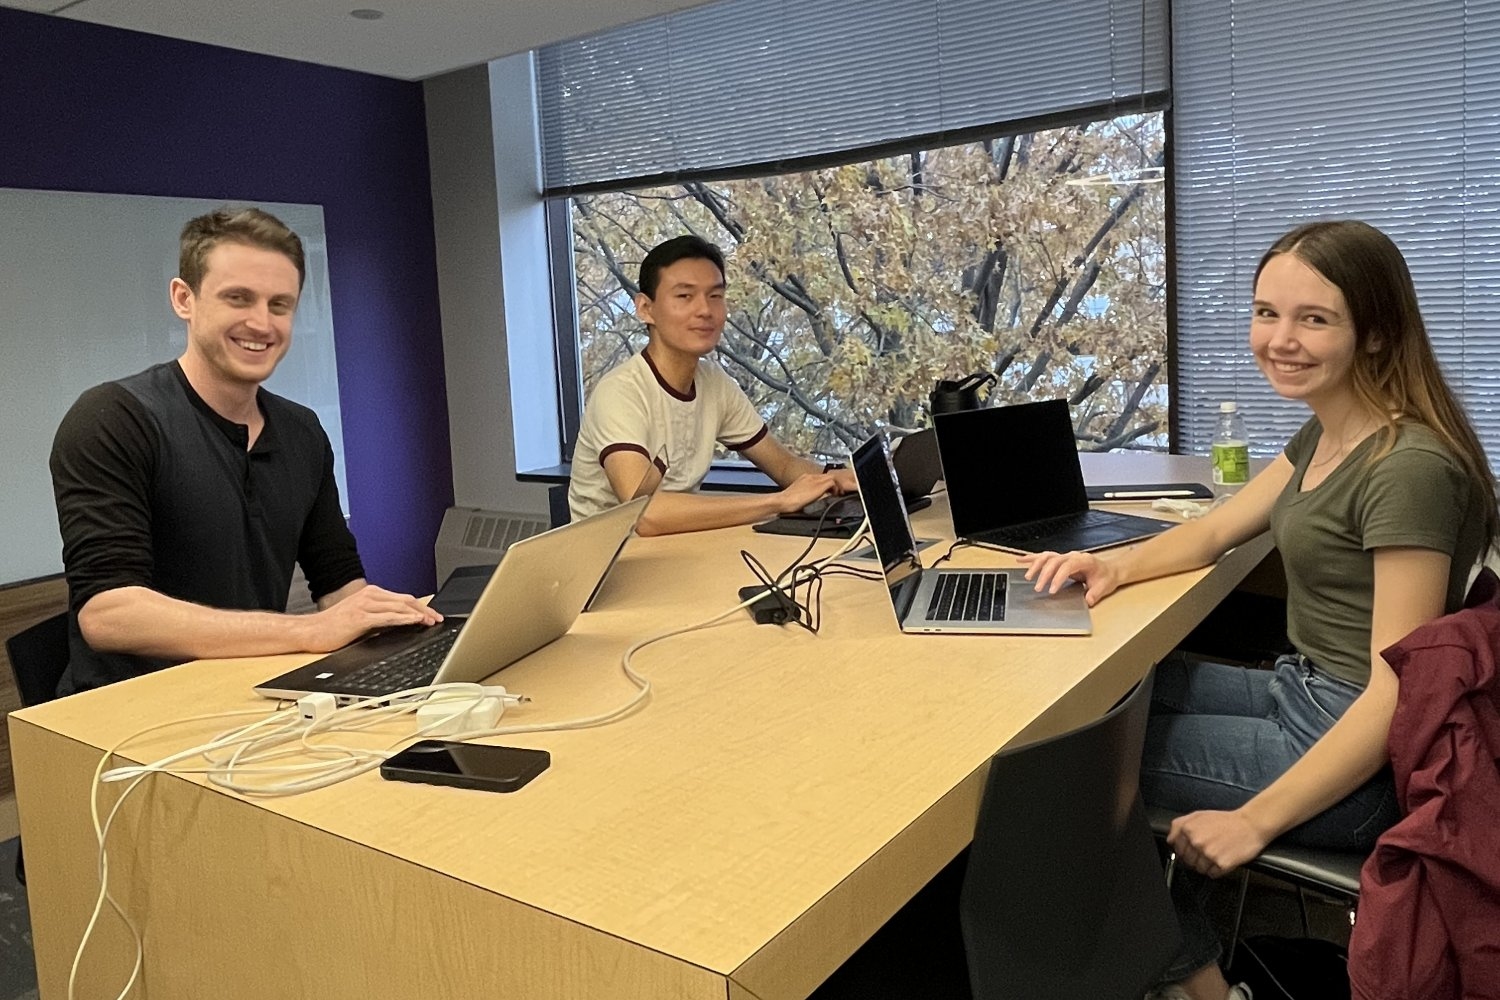 Members of team Ctrl+Alt+Defeat (left to right) Adrian Butterton, Eric Liu, and Ashley Peake work at MIT. 